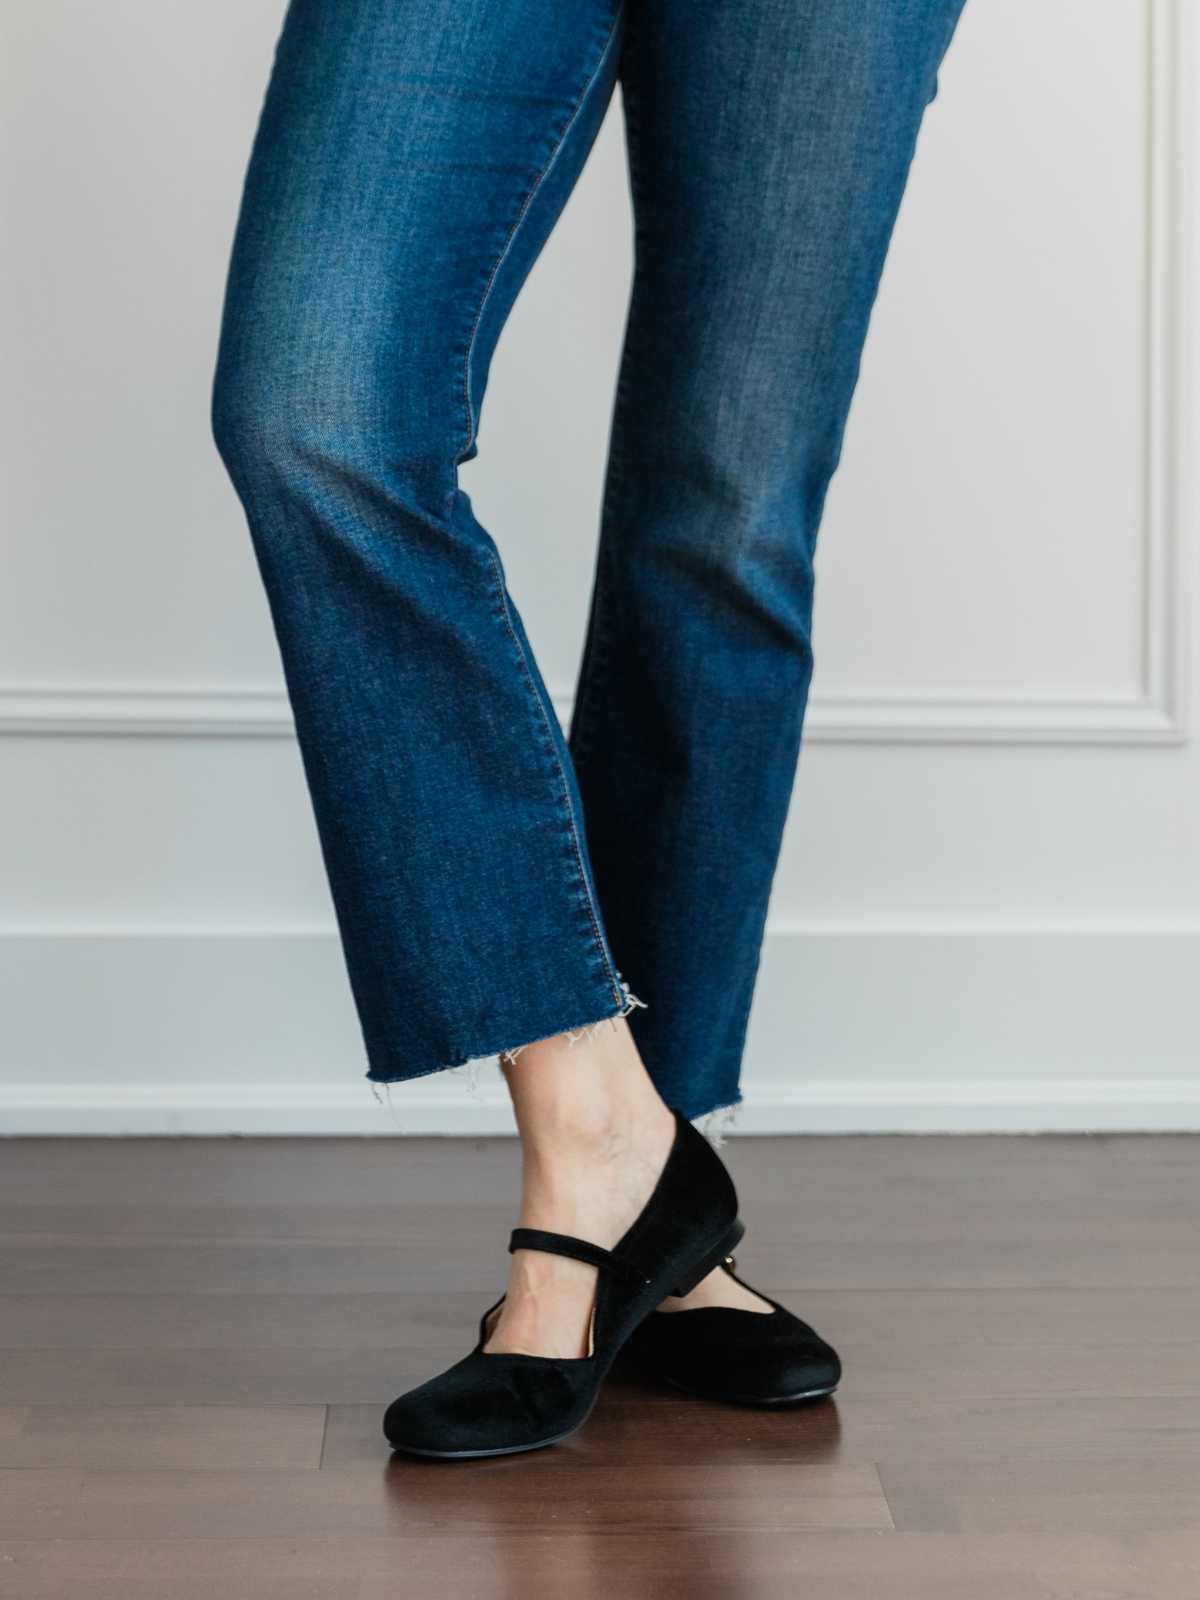 Cropped view of woman's legs wearing ballerina flats with kick flares